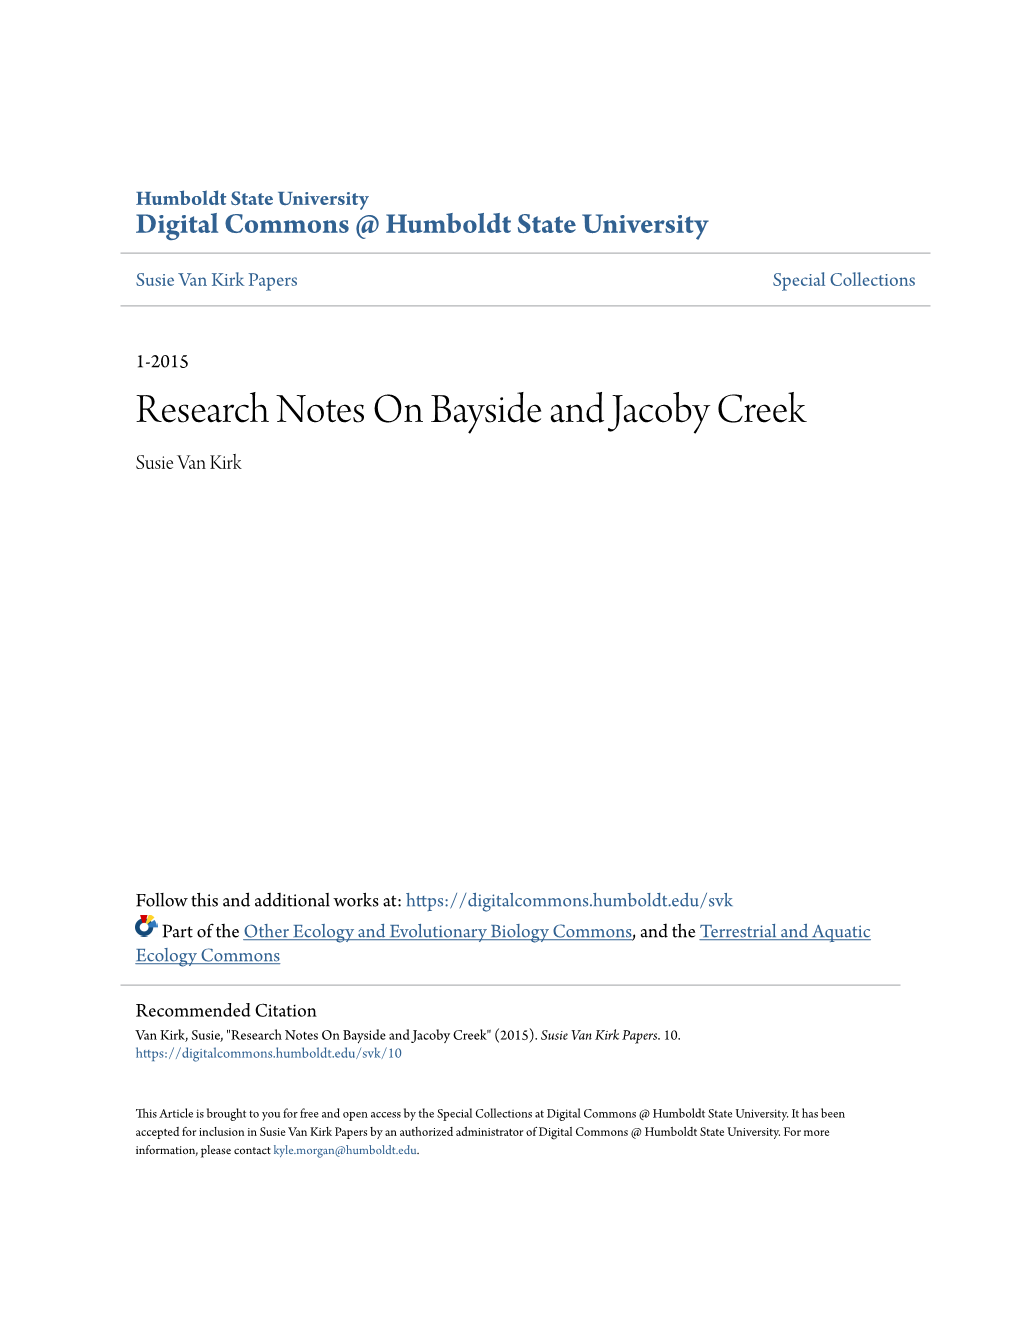 Research Notes on Bayside and Jacoby Creek Susie Van Kirk